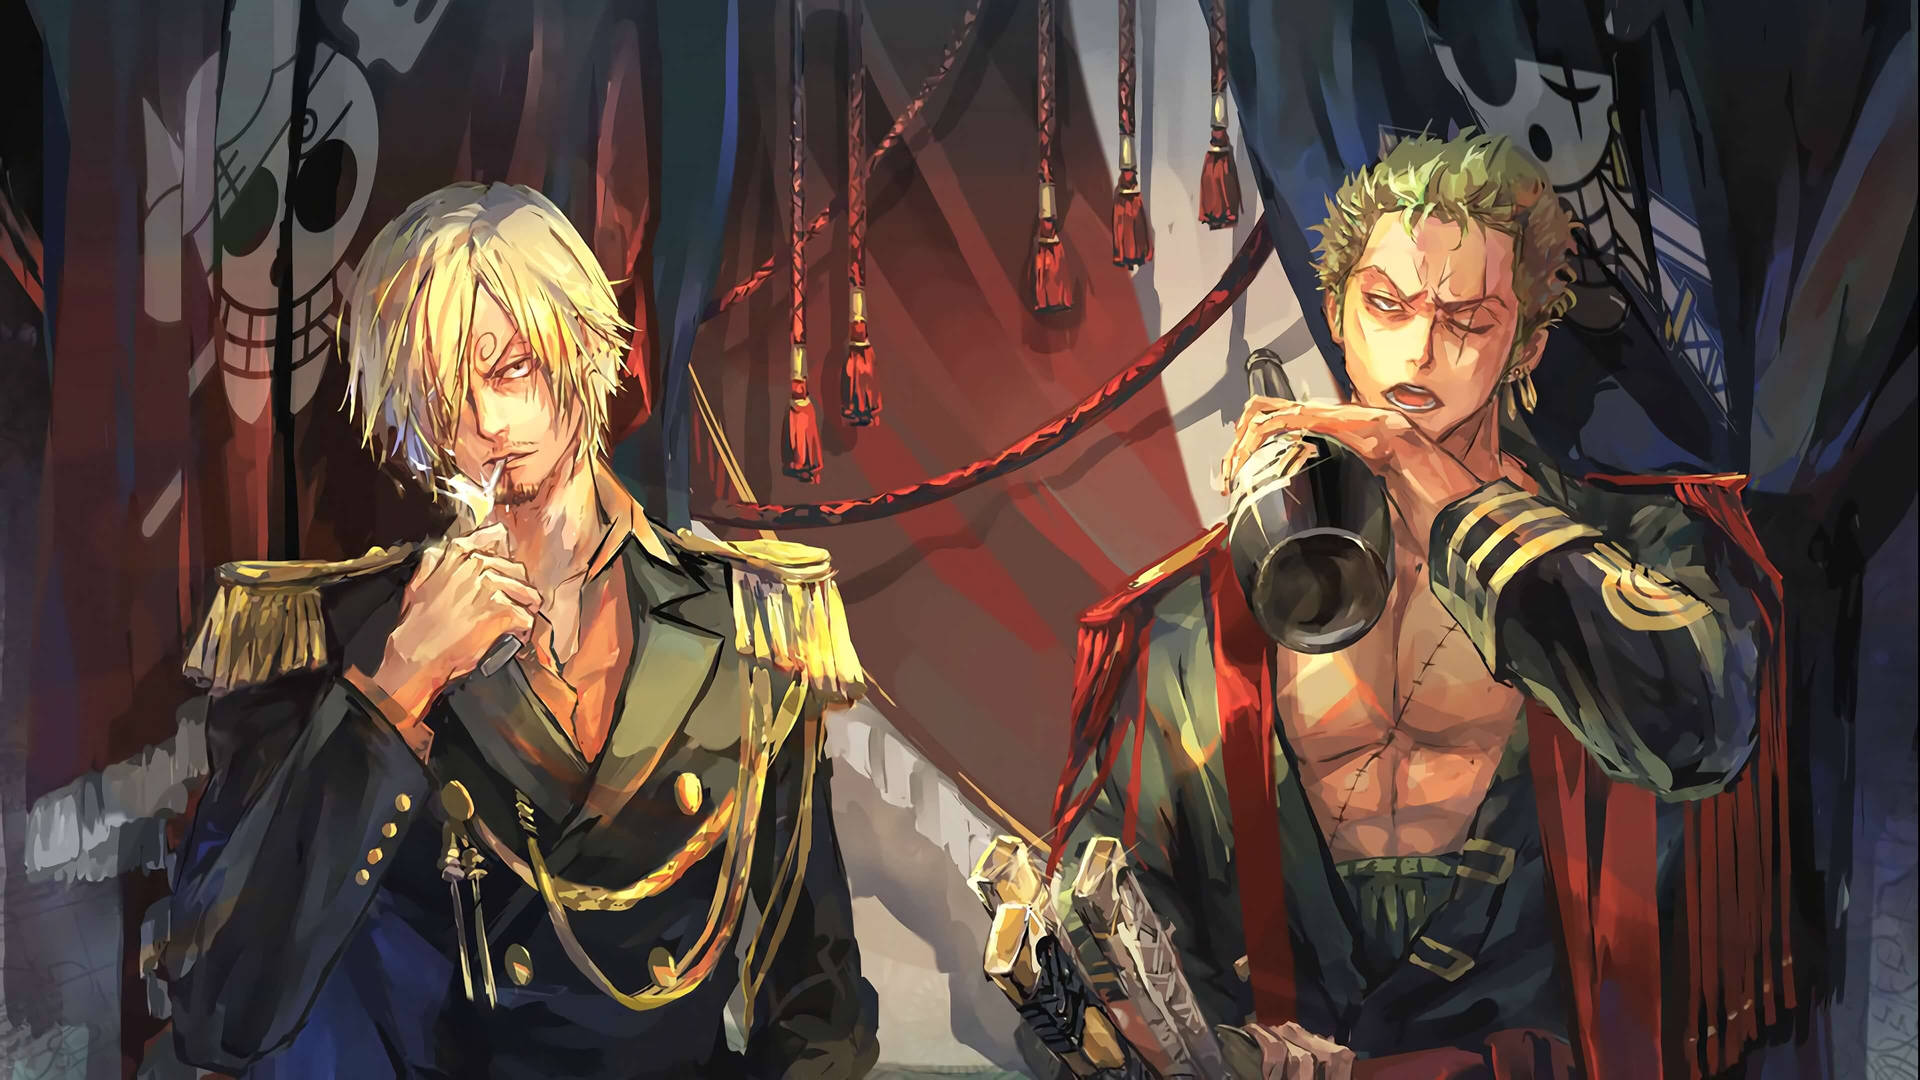 Sanji And Zoro Against Evil Forces In Their Soldier Outfits Background